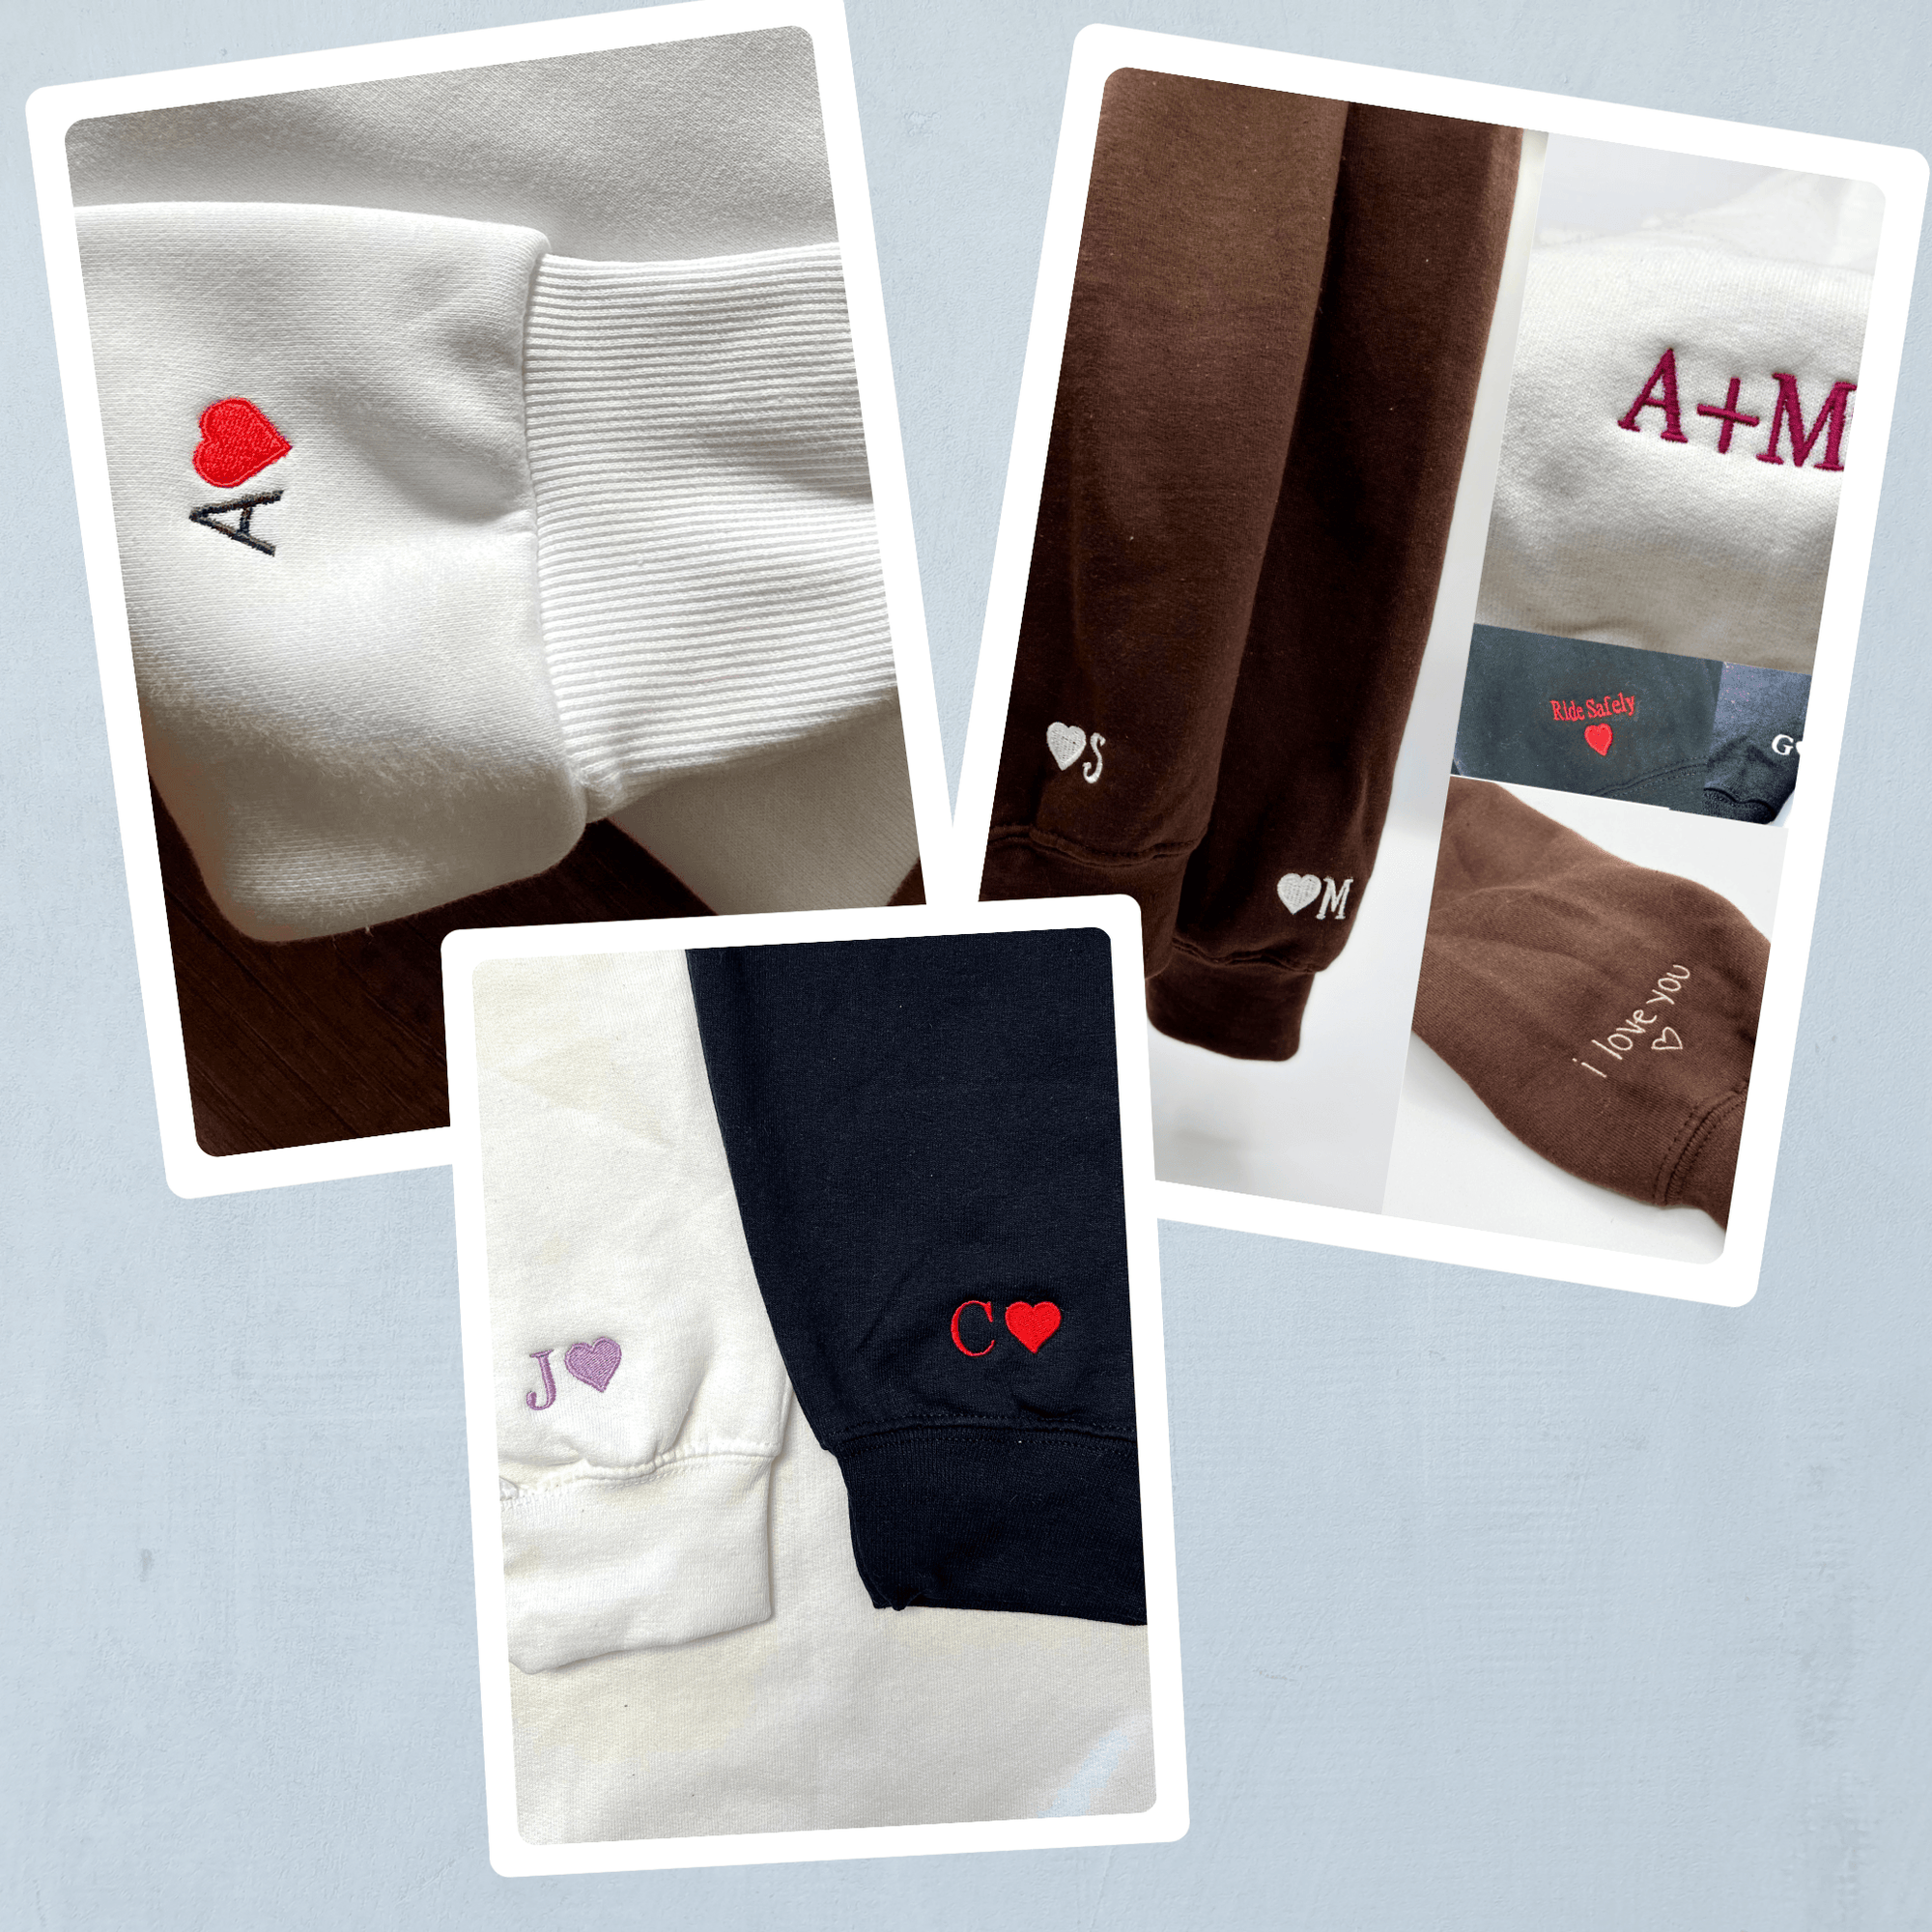 Custom Embroidered Hoodies For Couples, Custom Matching Couple Hoodie, Flame Couples Embroidered Hoodie